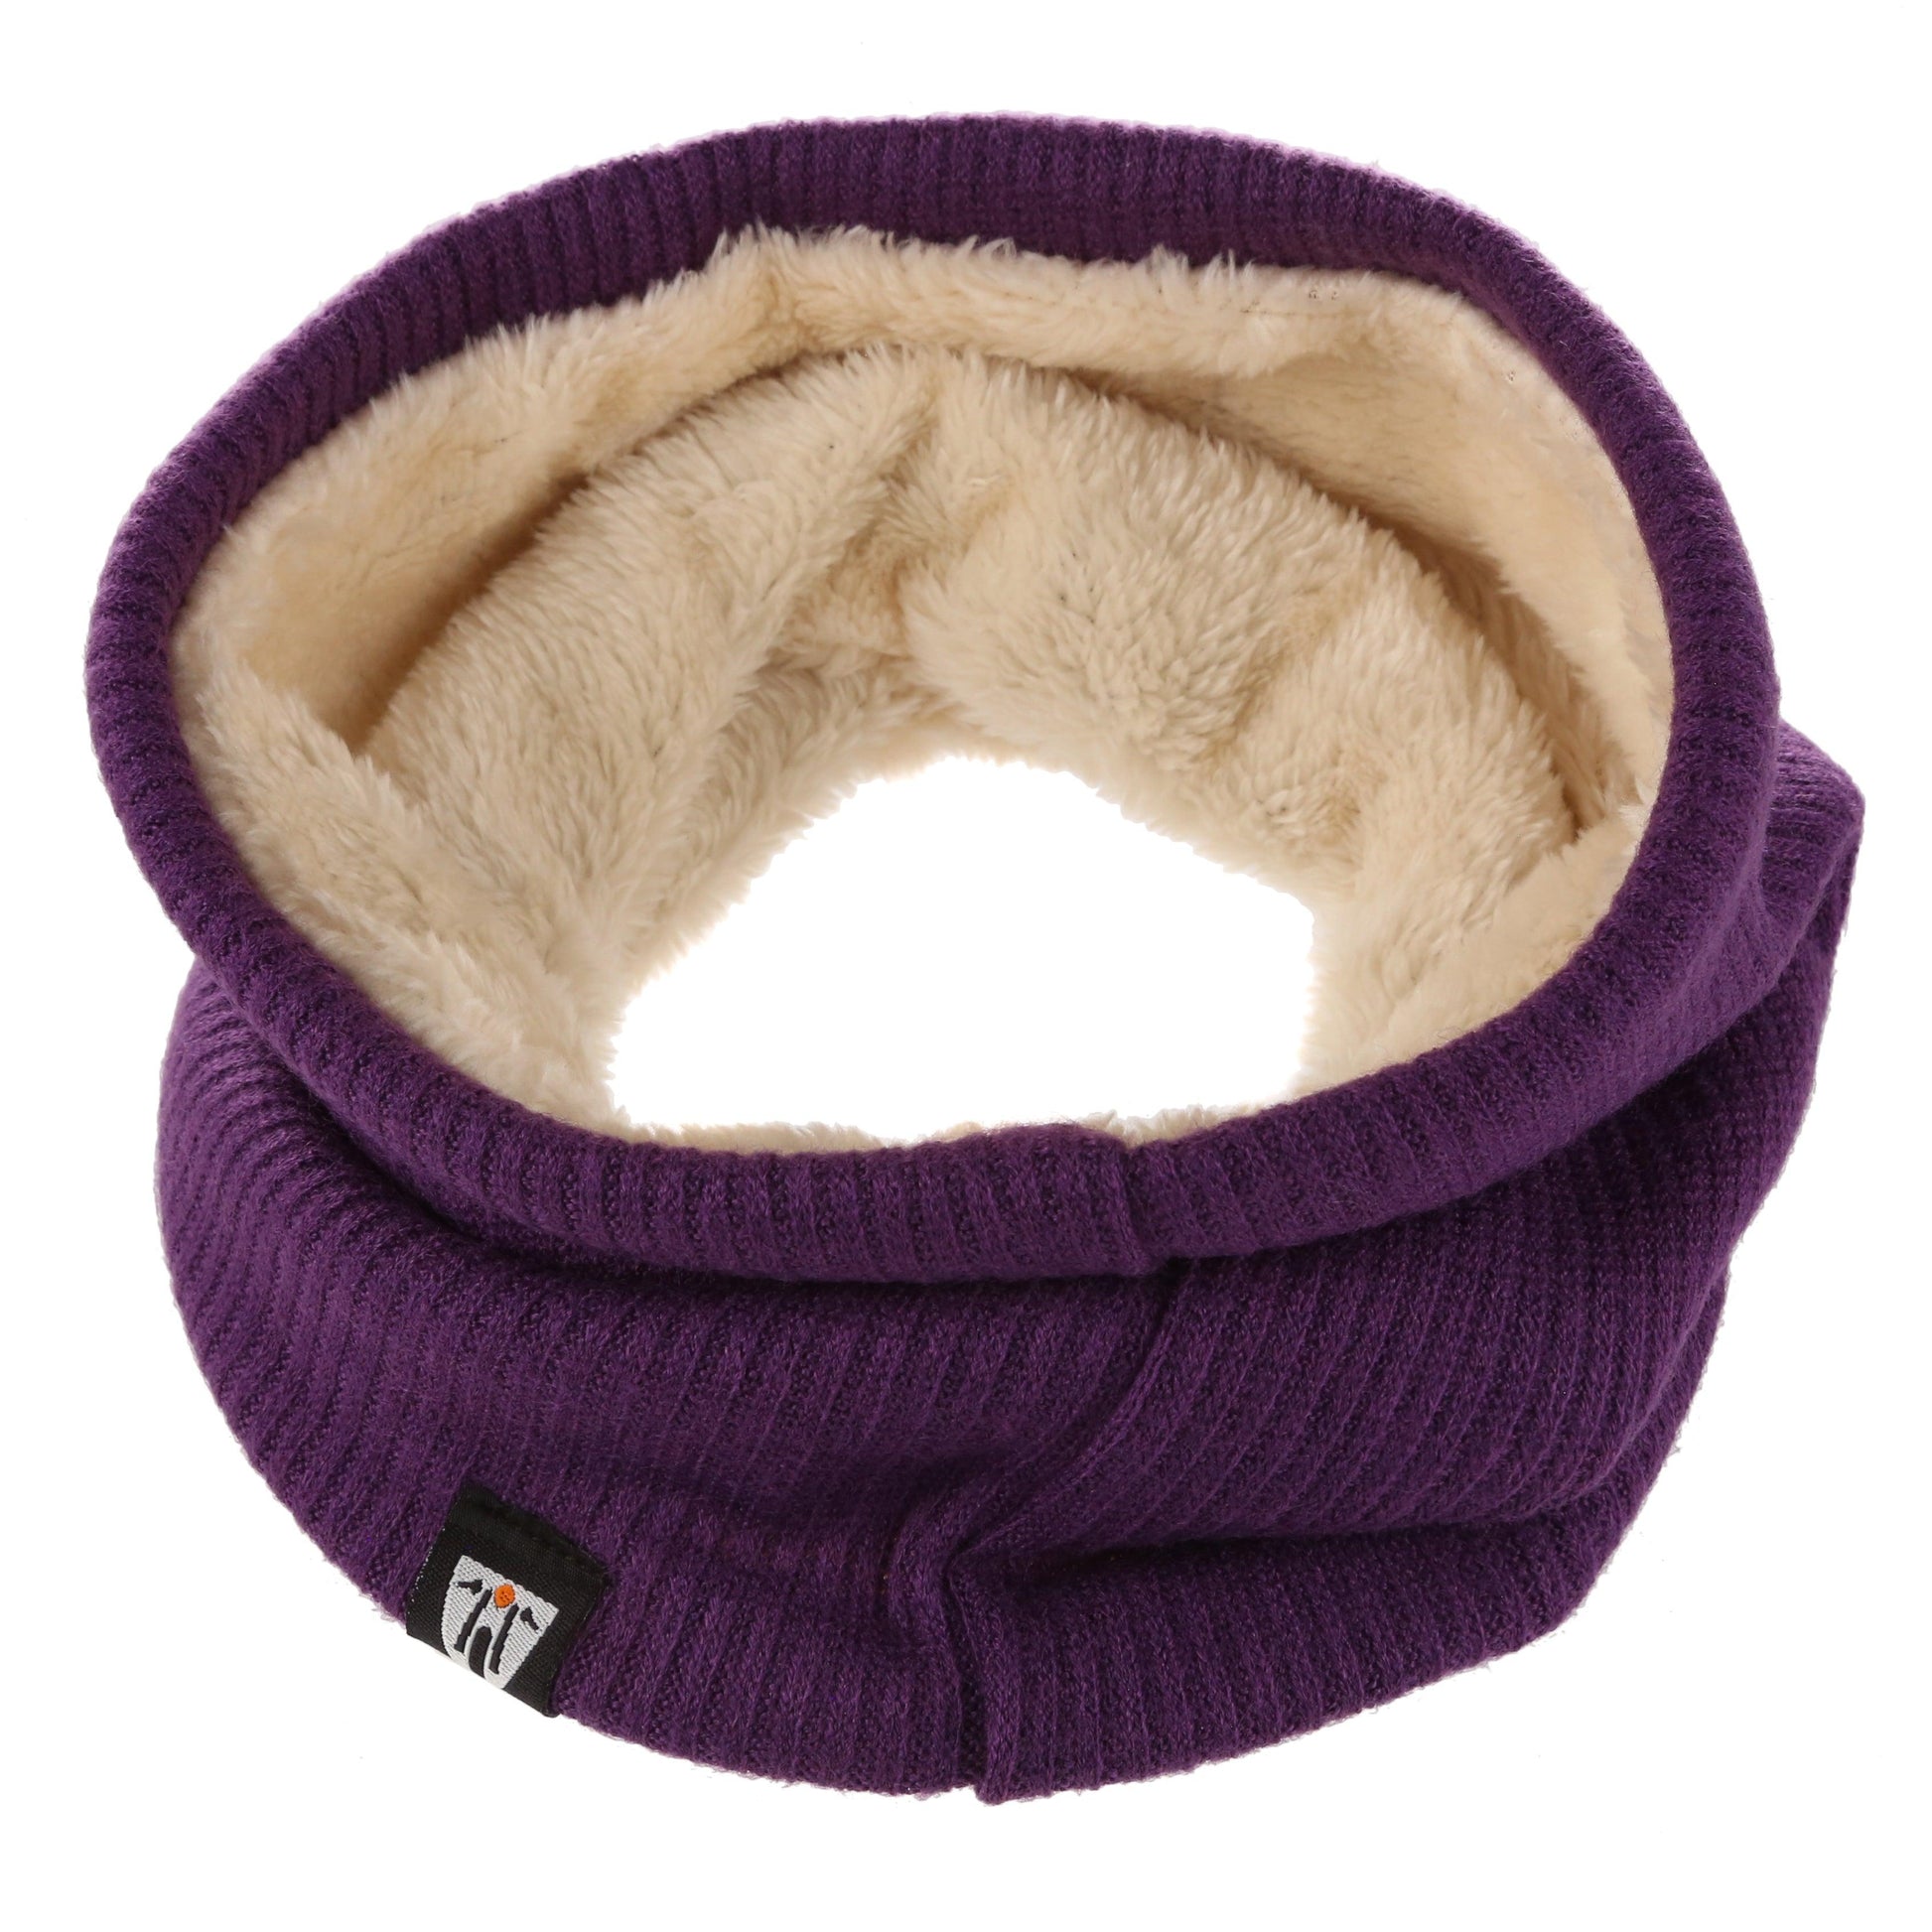 Neck Warmer **SALE** - Newmarket Motorcycle Company 